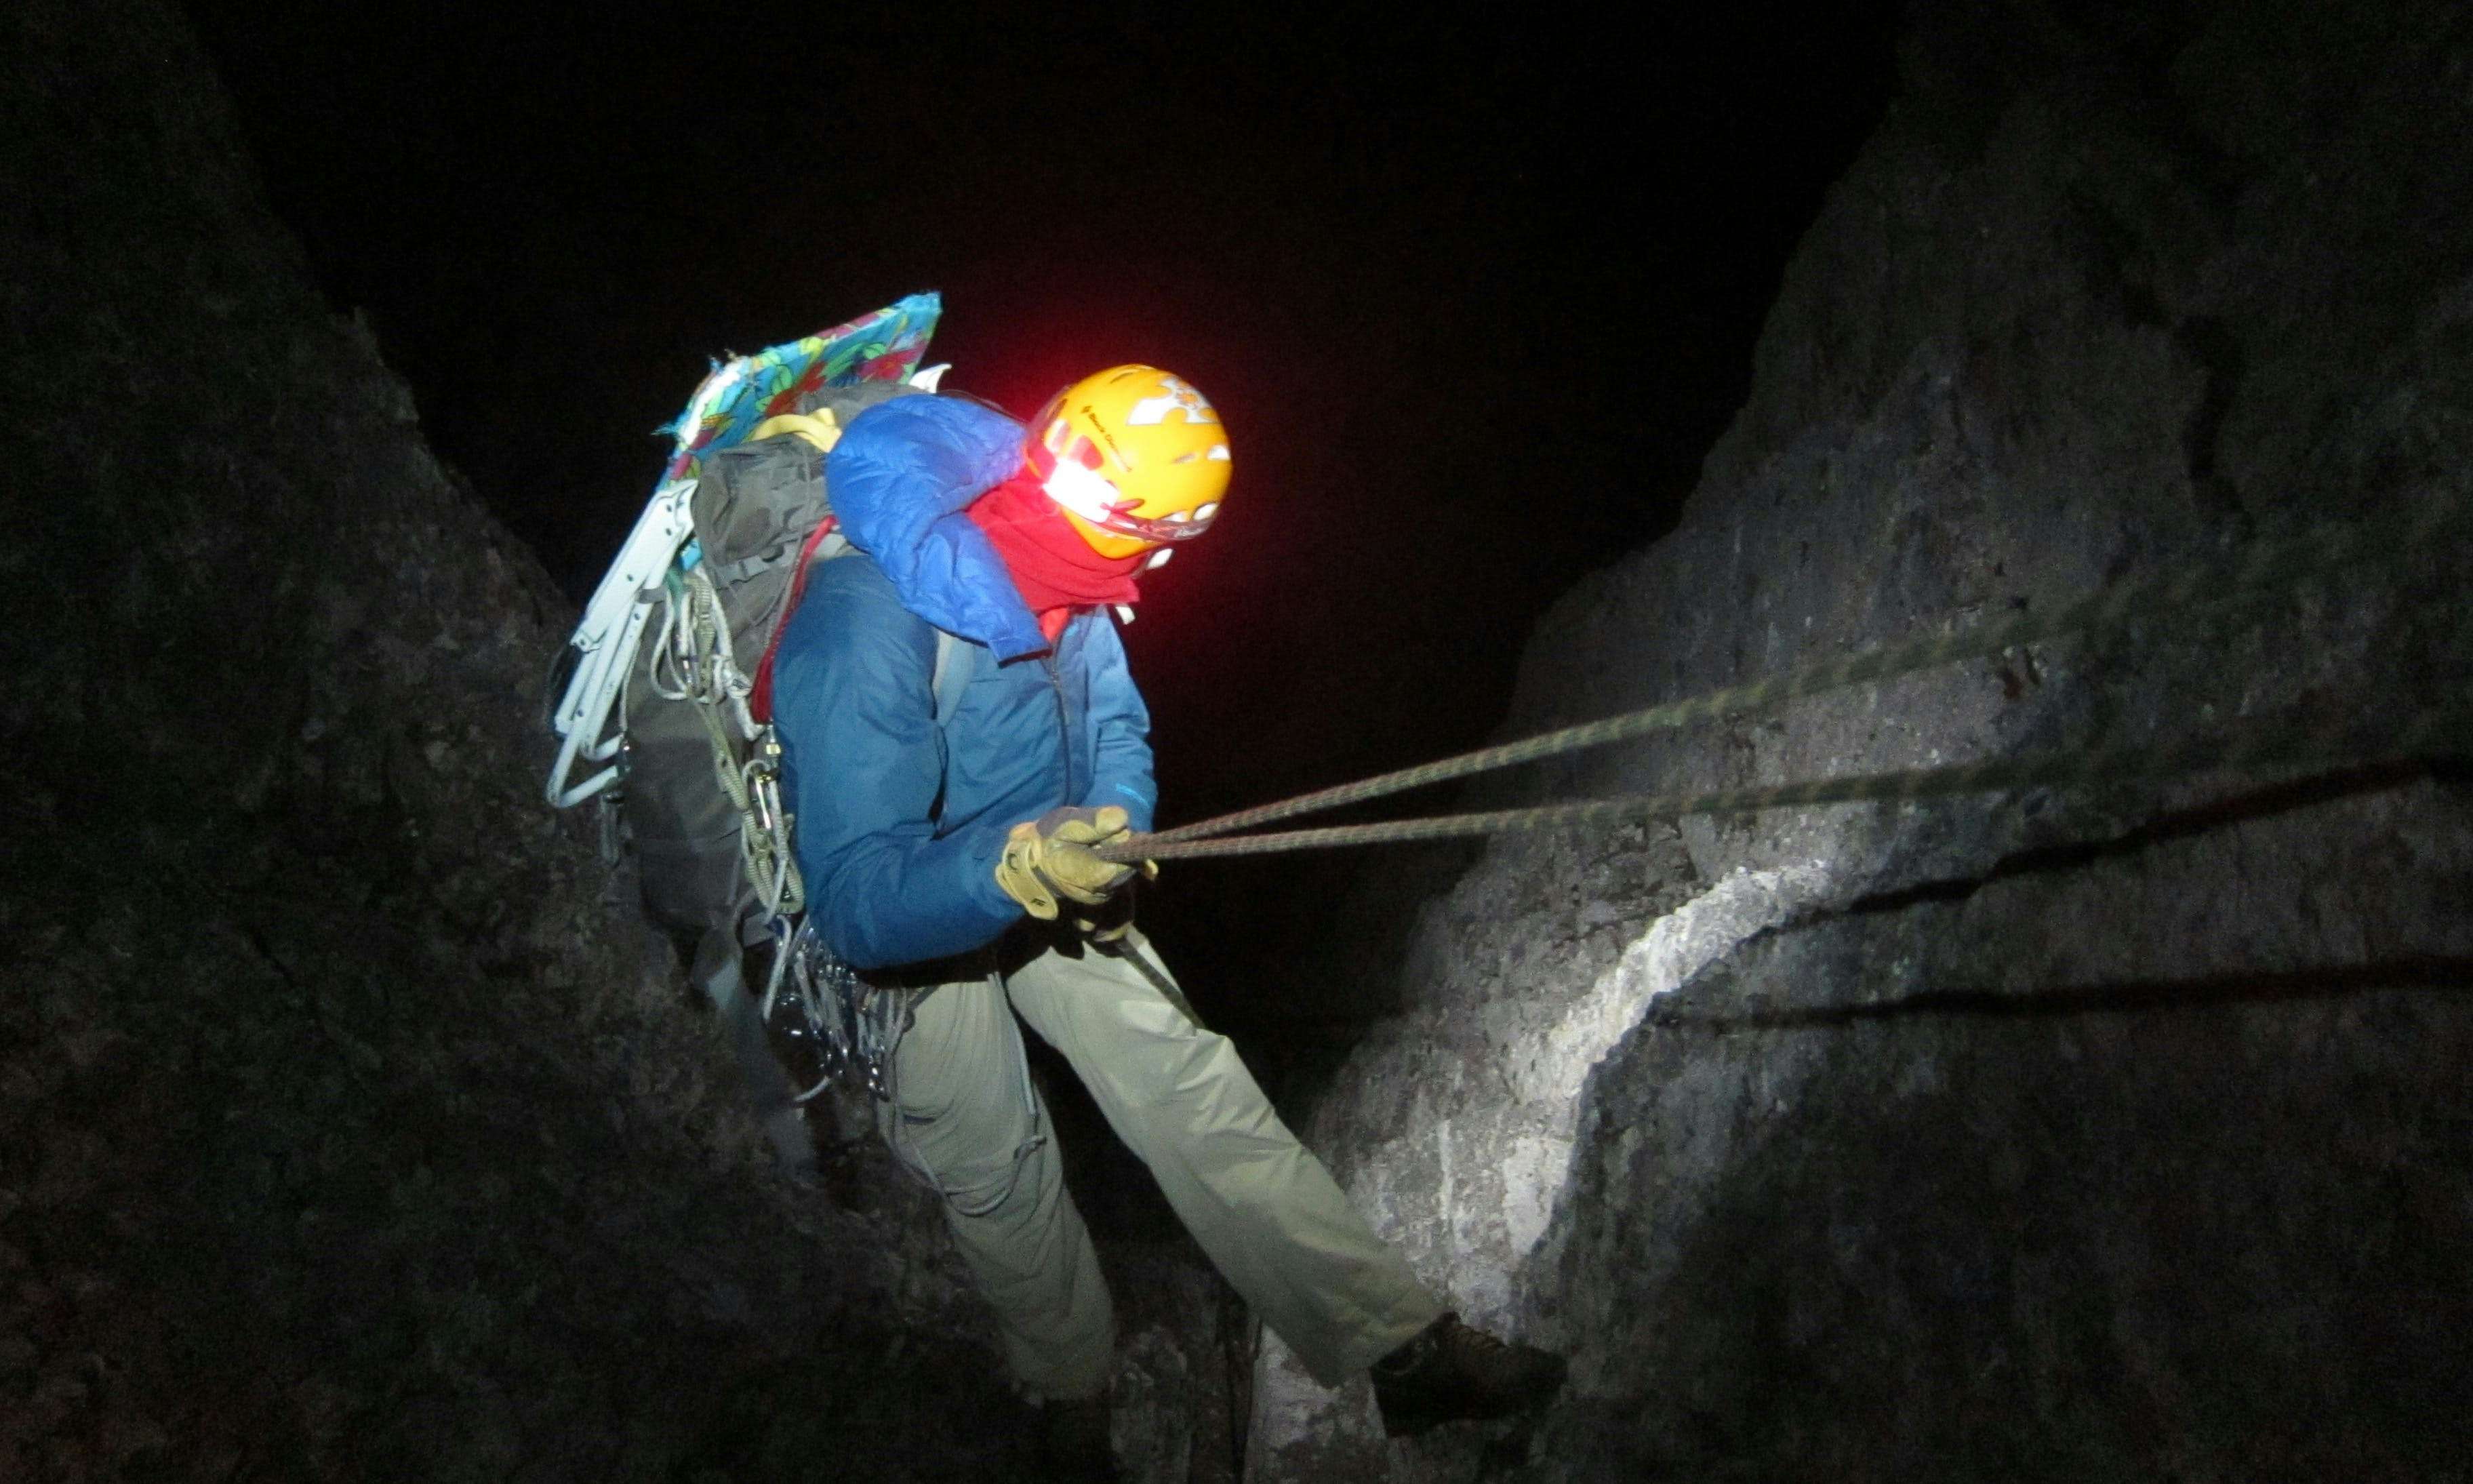 Climber going down a Mount Louis at night